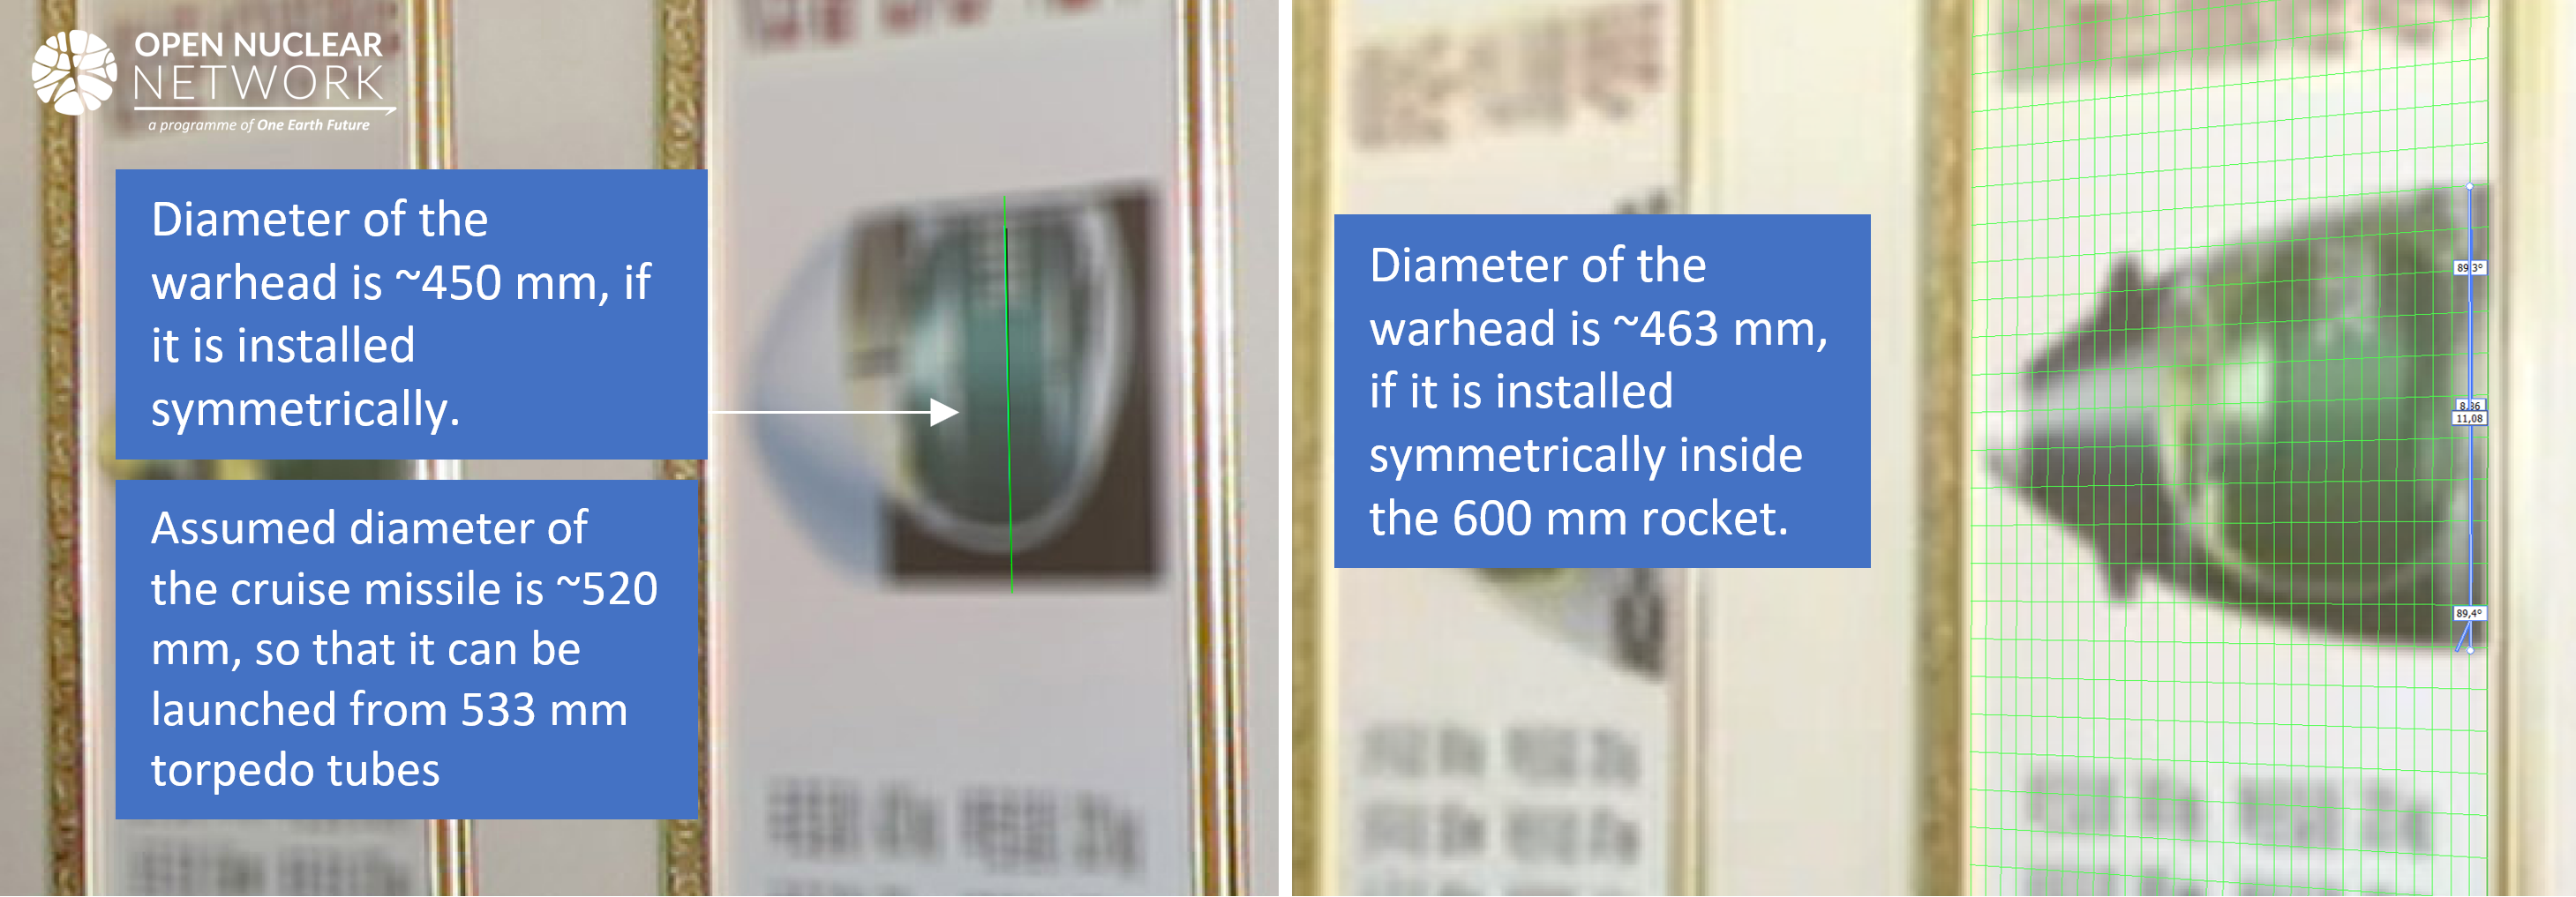 Figure 17. Rough measurements made on diagram of 600 mm MRL rocket and cruise missile likely to have diameter of around 520 mm. Images: KCNA